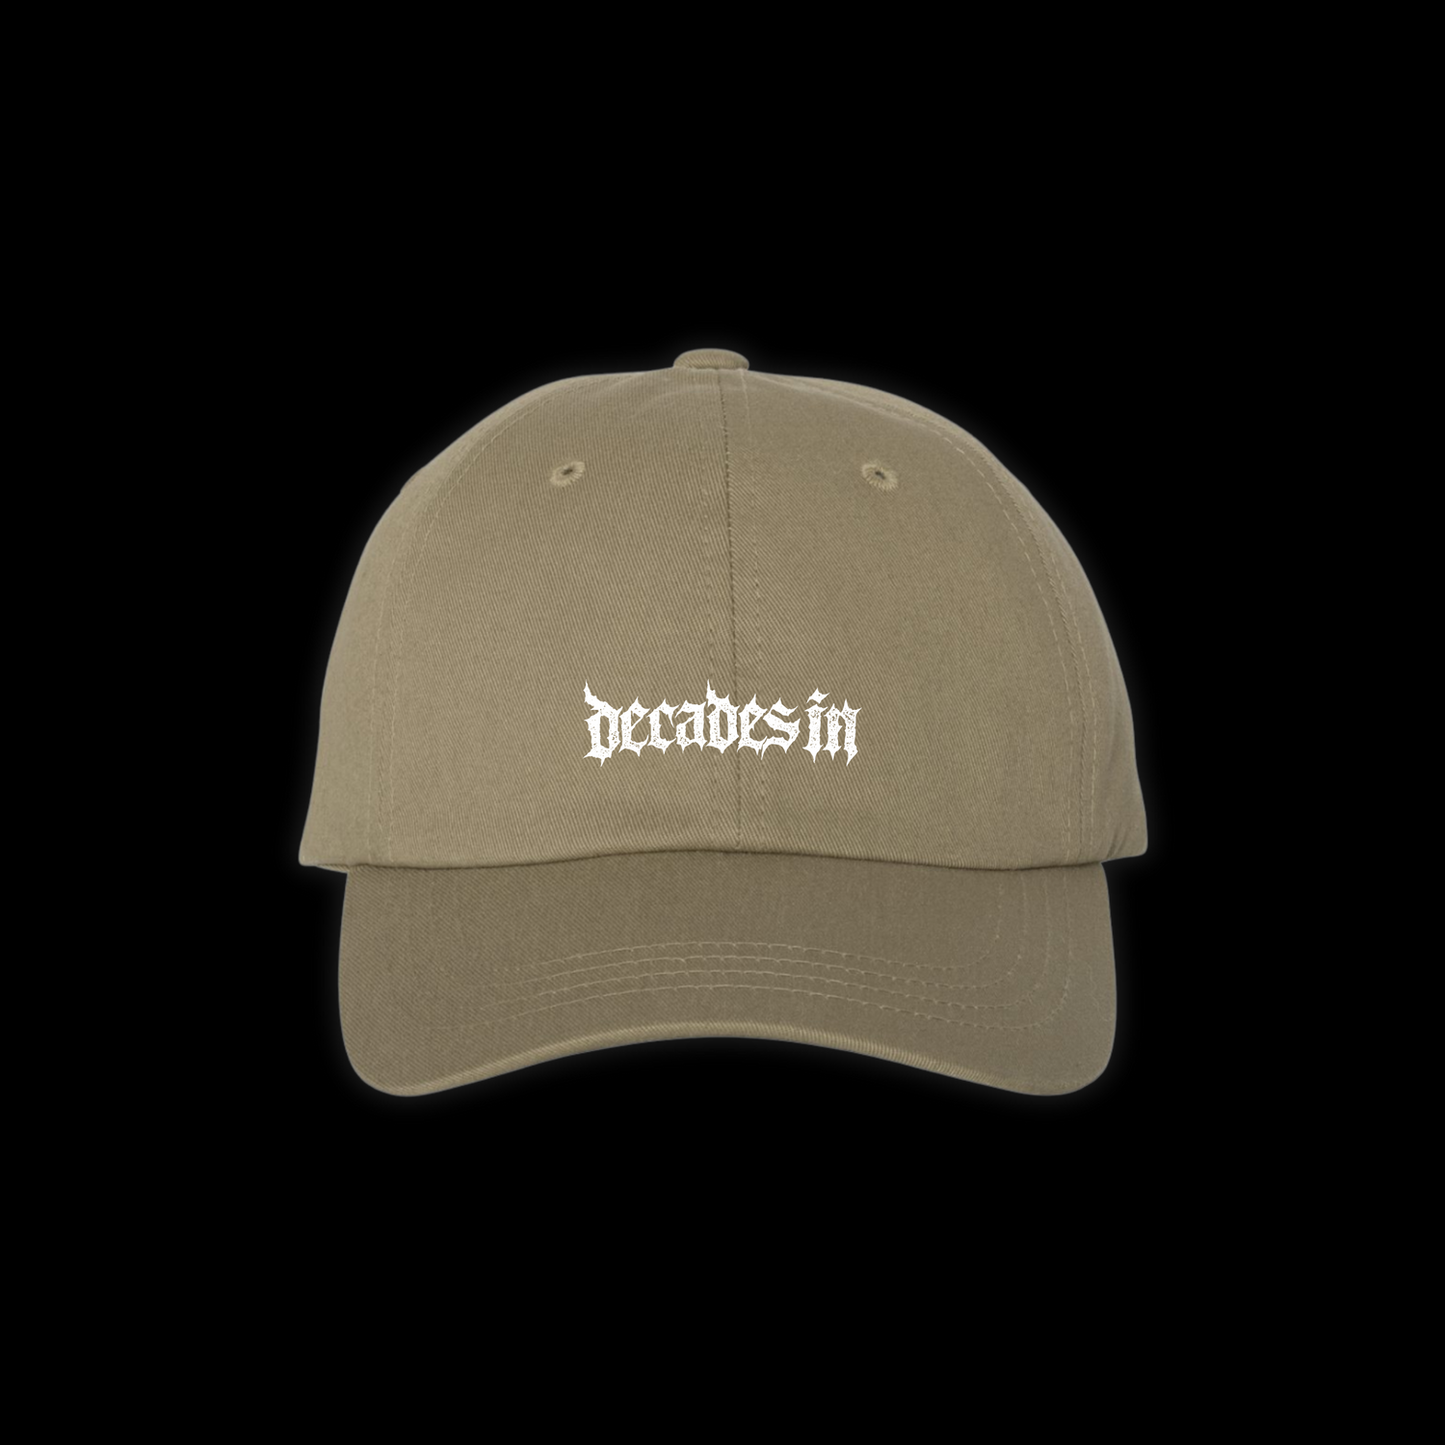 Decades In Official Logo Dad Hat